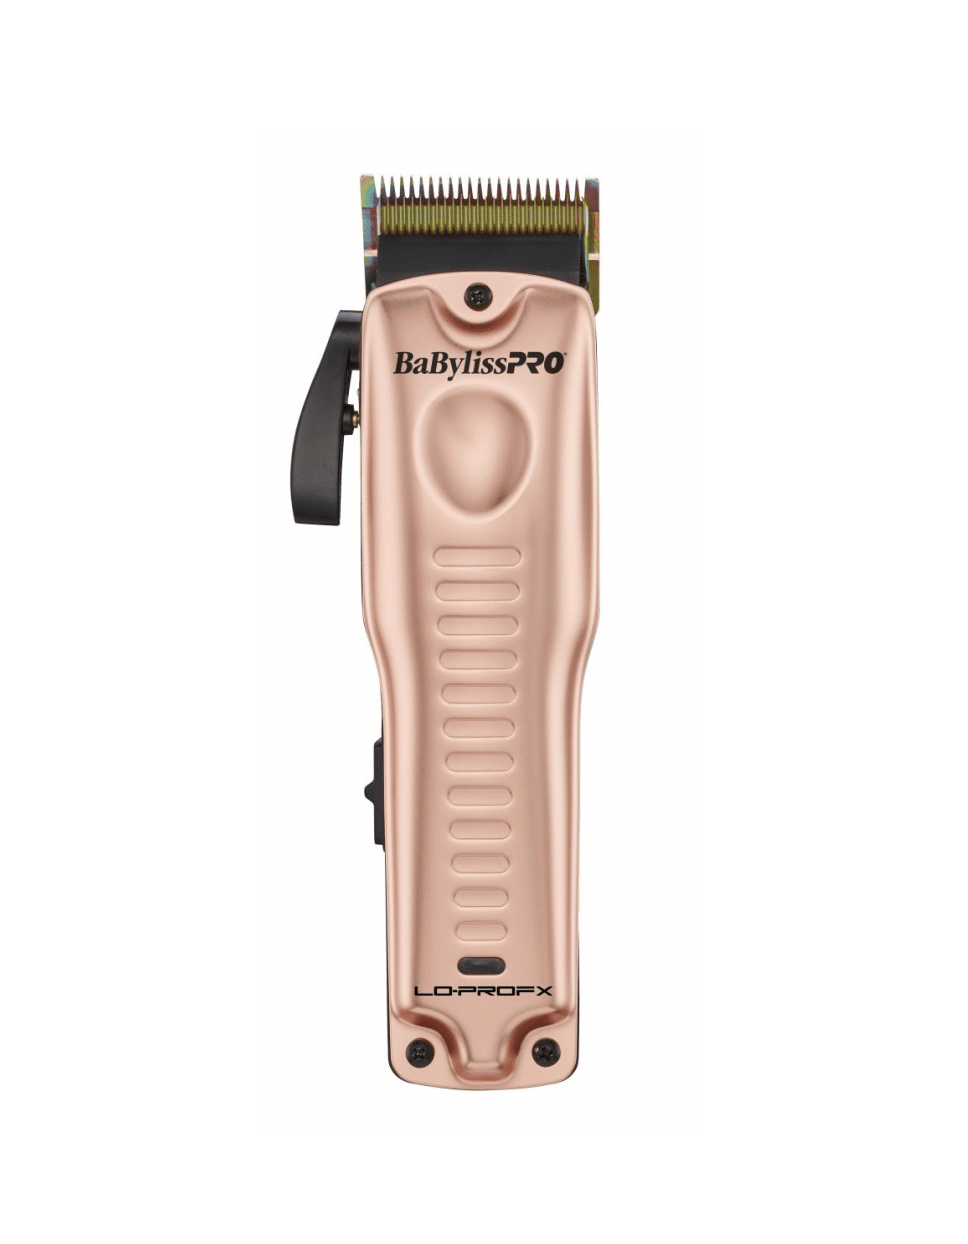 Tomb 45 Babyliss performance Motor for Babyliss FX Clipper